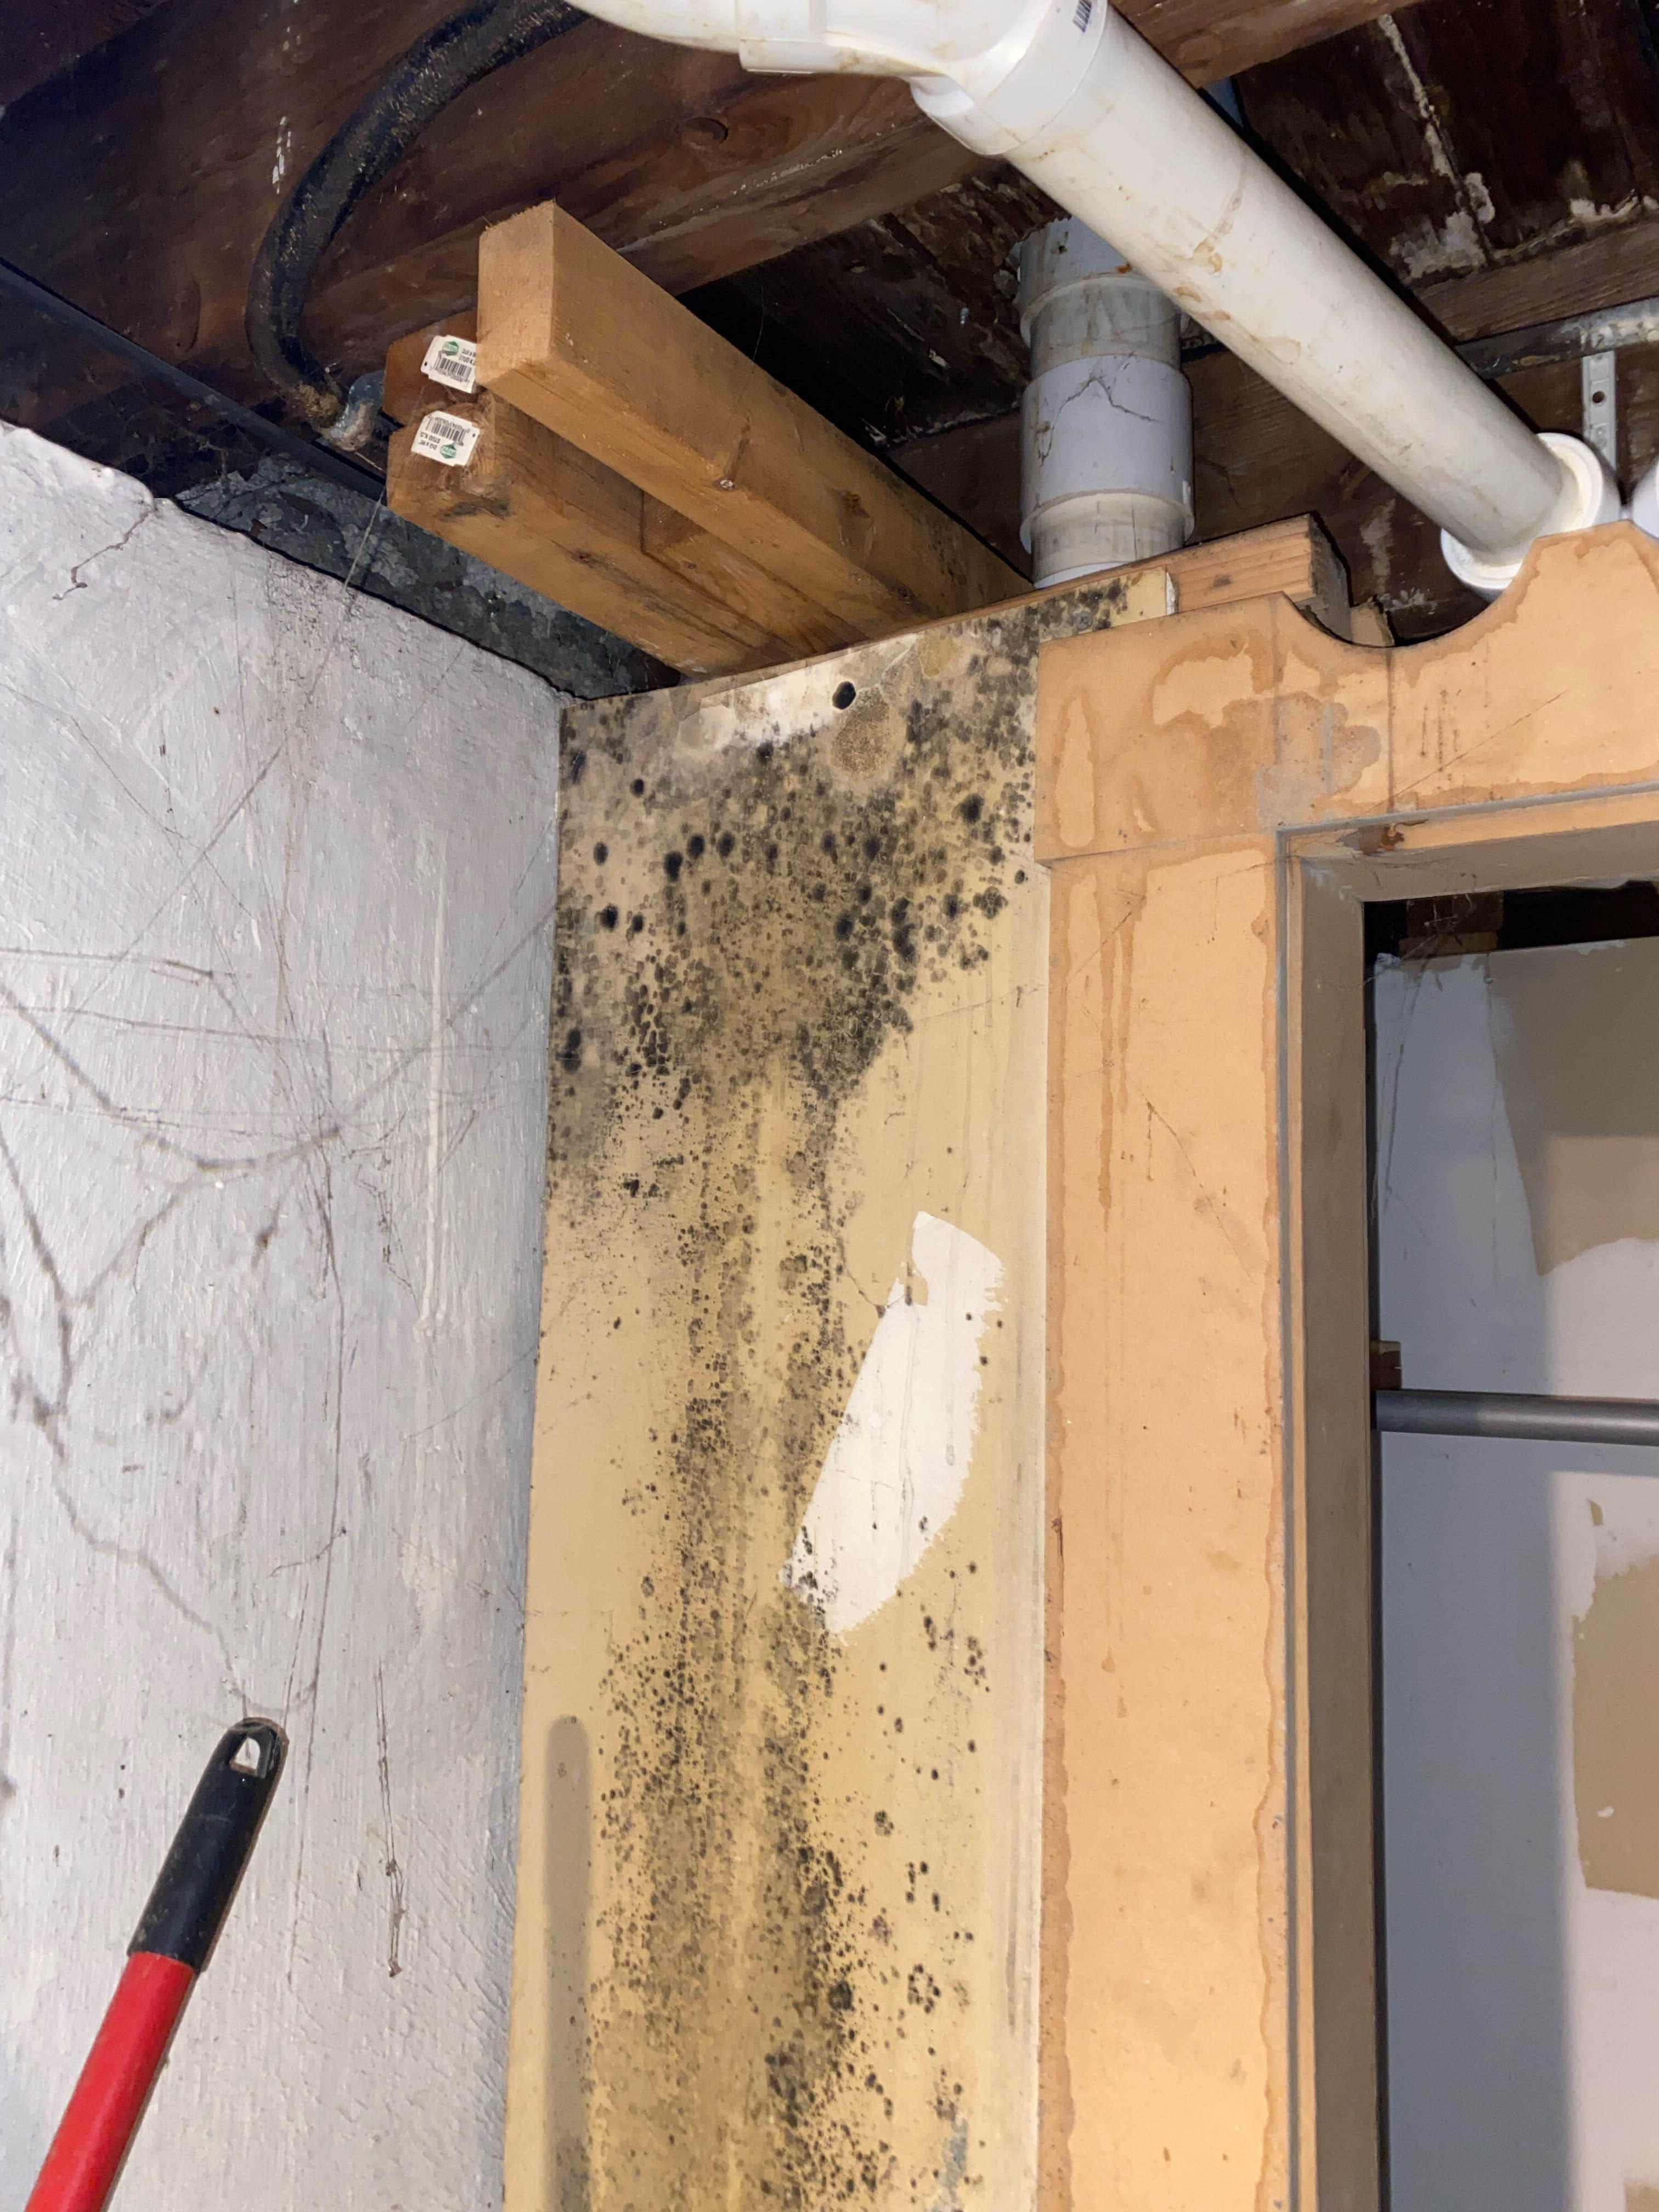 You can rely on SERVPRO of Providence for all of your mold damage cleanup and remediation needs in Olneyville, RI. Give us a call!